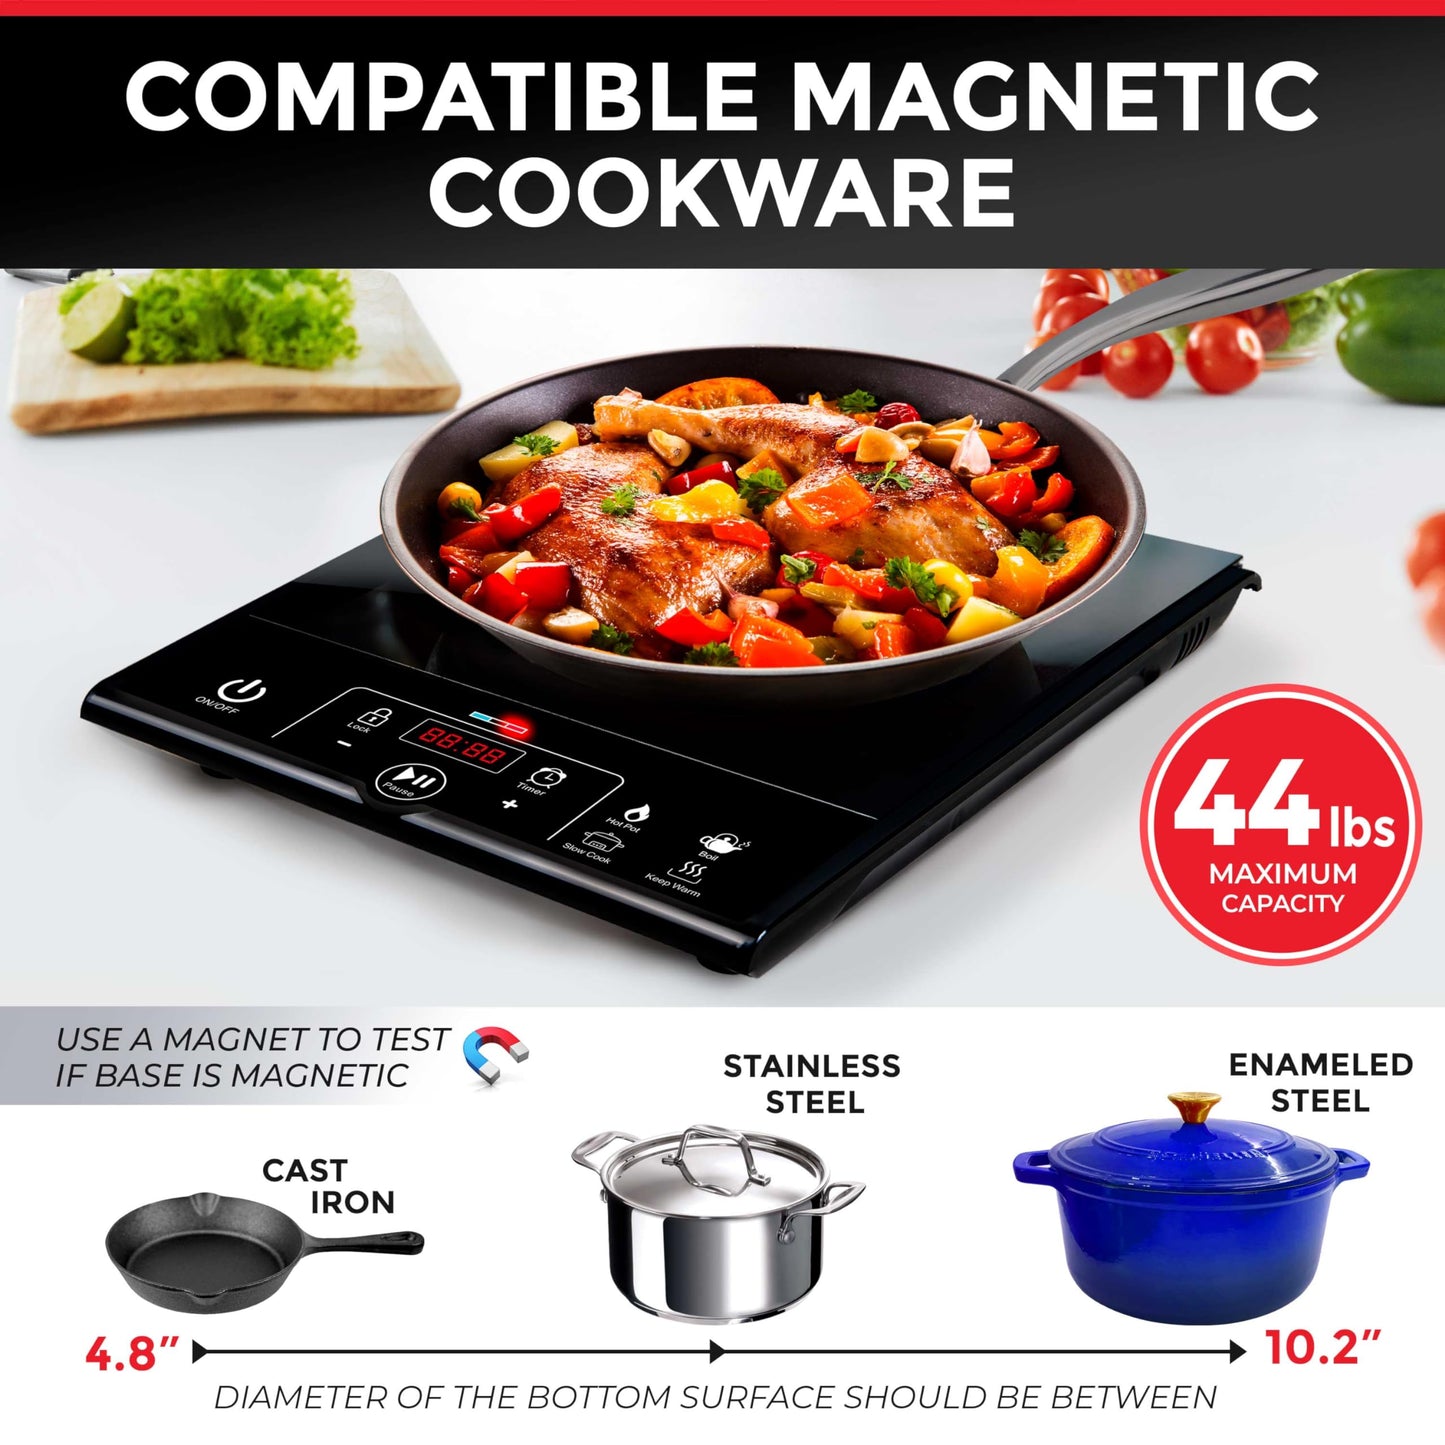 Mueller RapidTherm Portable Induction Cooktop Hot Plate Countertop Burner 1800W, 8 Temp Levels, Timer, Auto-Shut-Off, Touch Panel, LED Display, Auto Pot Detection